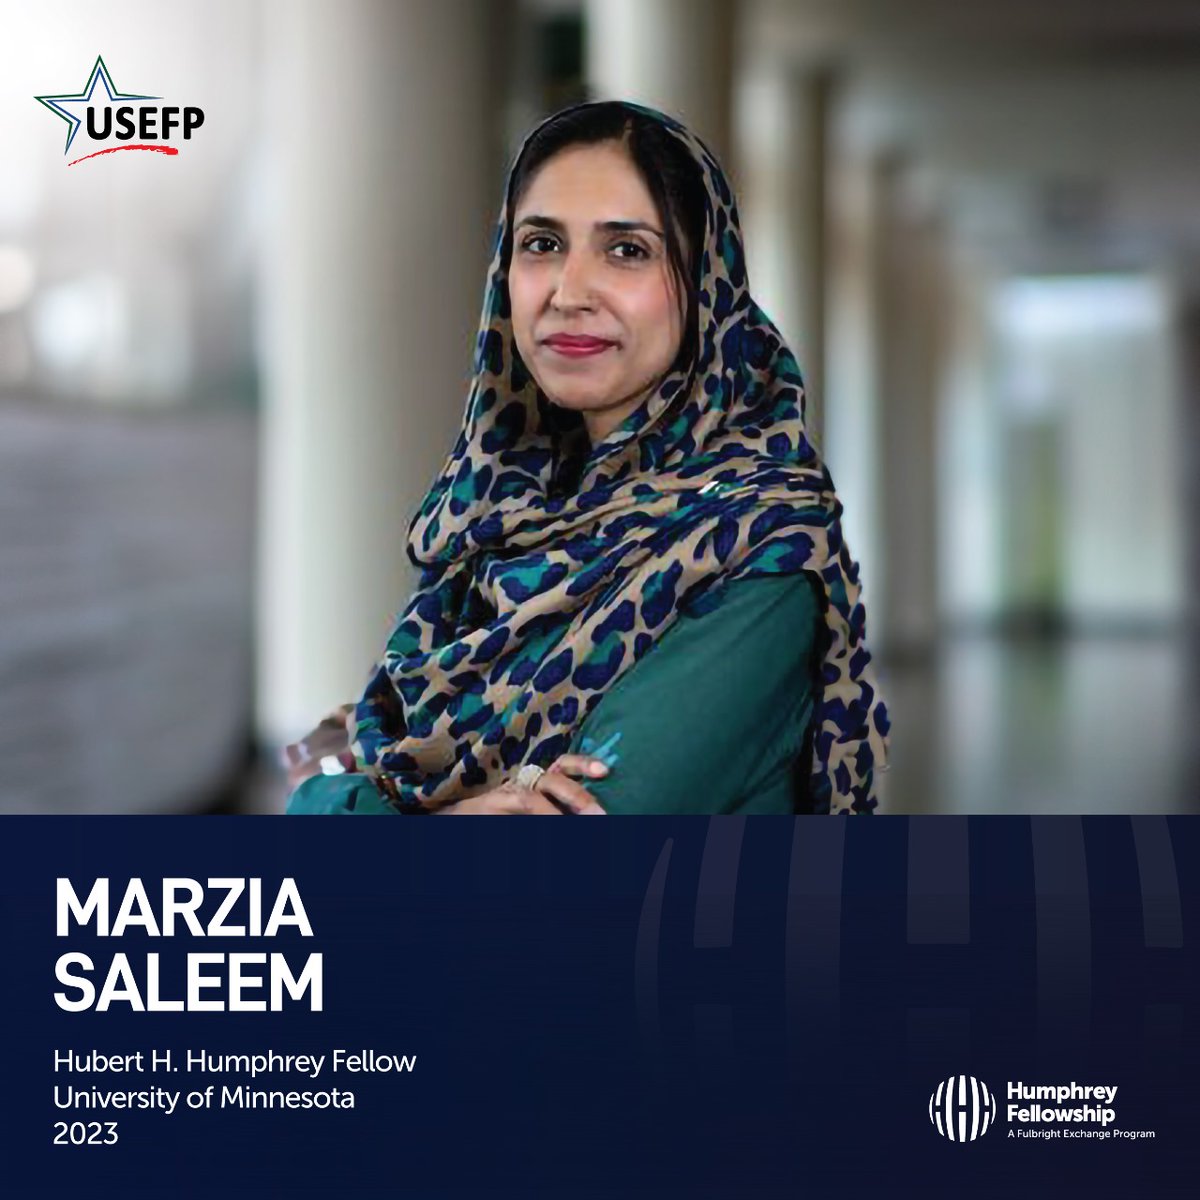 Marzia Saleem, a #Humphrey Fellow at the University of Minnesota, is expanding her skills and knowledge in effective public policies and processes related to gender policy, marginalized communities, and employment opportunities for differently-abled persons. #USEFP #USPAK